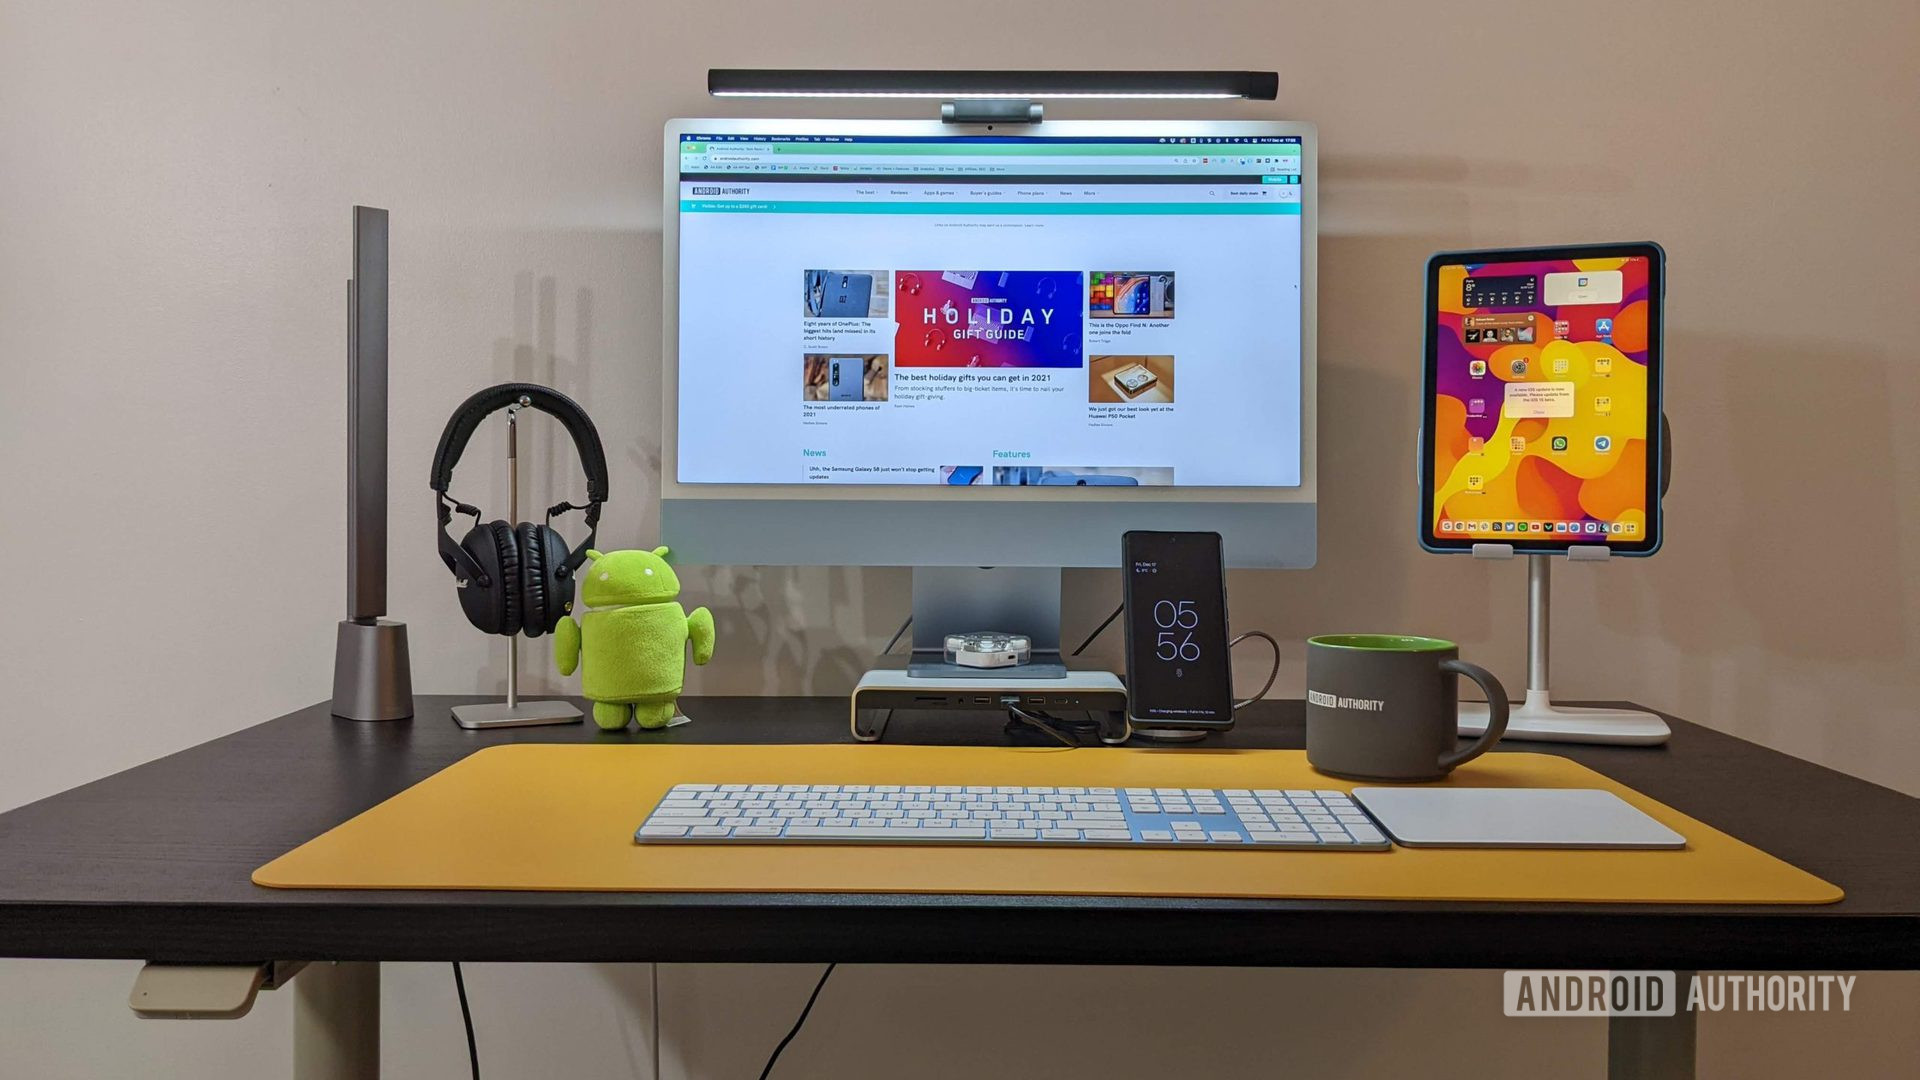 Ikea Idasen sit-stand desk with M1 iMac 2021, iPad Air 4 2020, Pixel 6 Pro, Android plush, Marshall Monitor II ANC, yellow desk mat, Sateshi USB-C hub monitor stand, and more